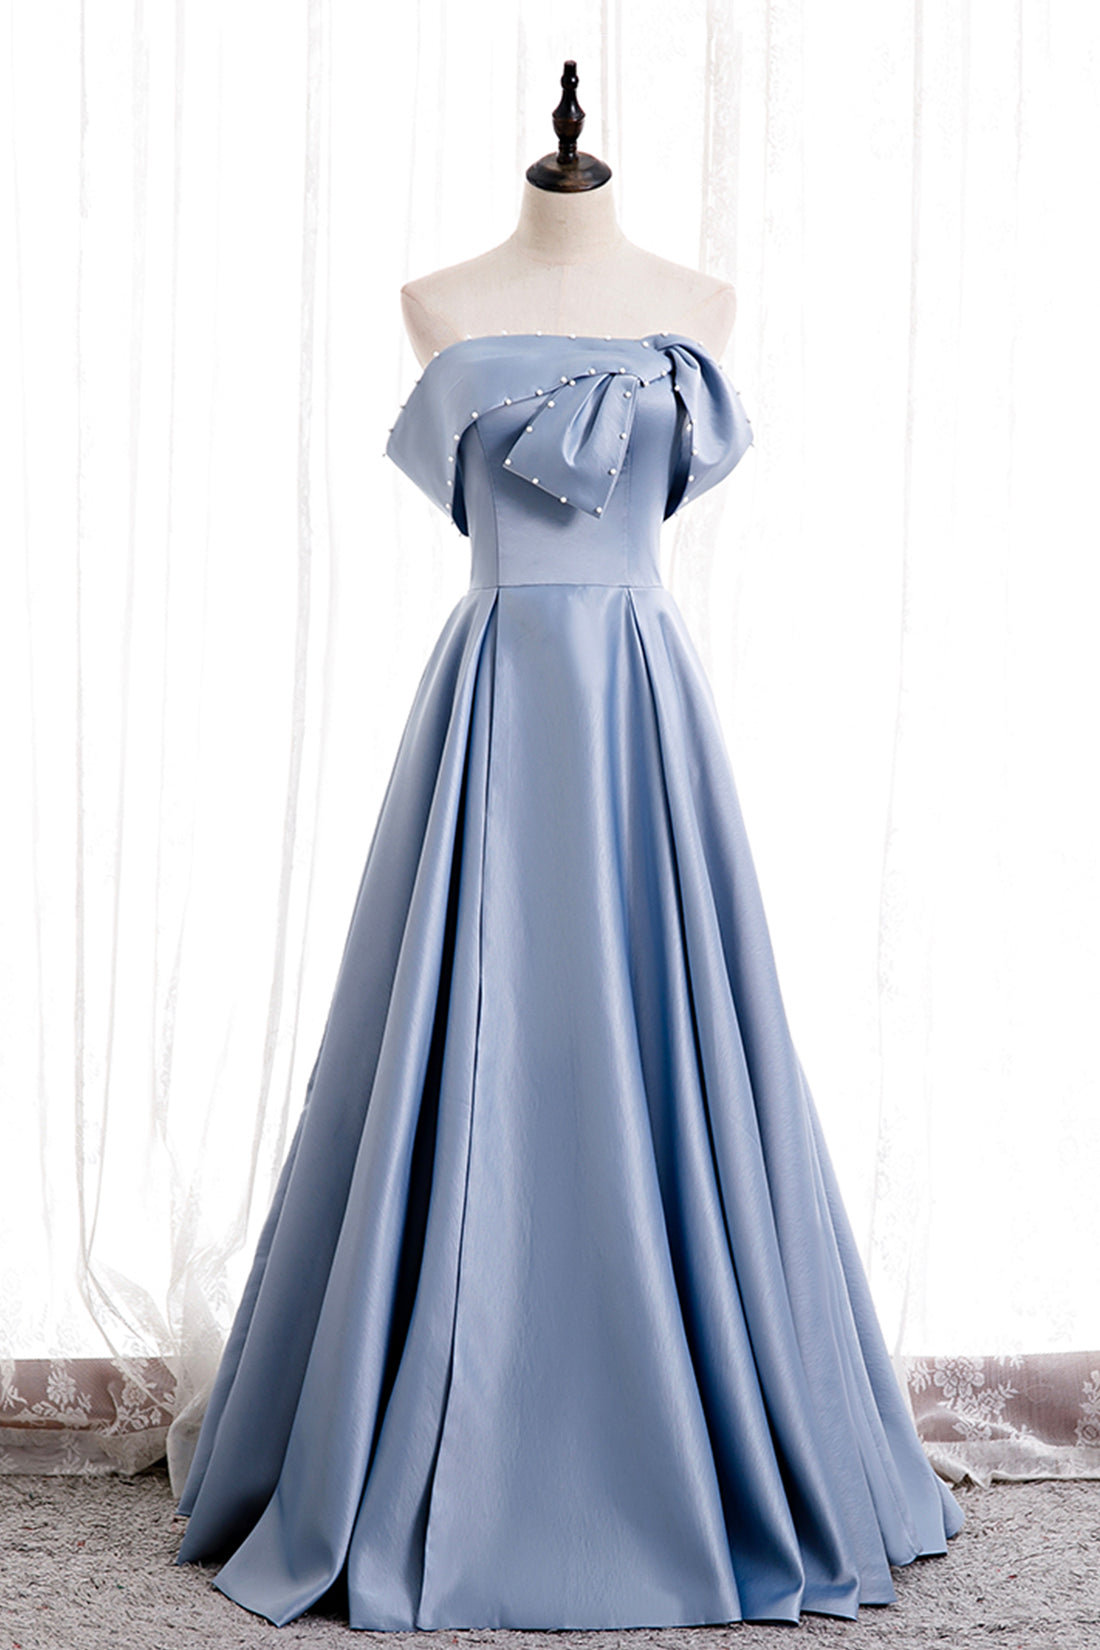 Mermaid Wedding Dress, Blue Satin Long Prom Dress with Pearls, Blue A-Line Strapless Party Dress